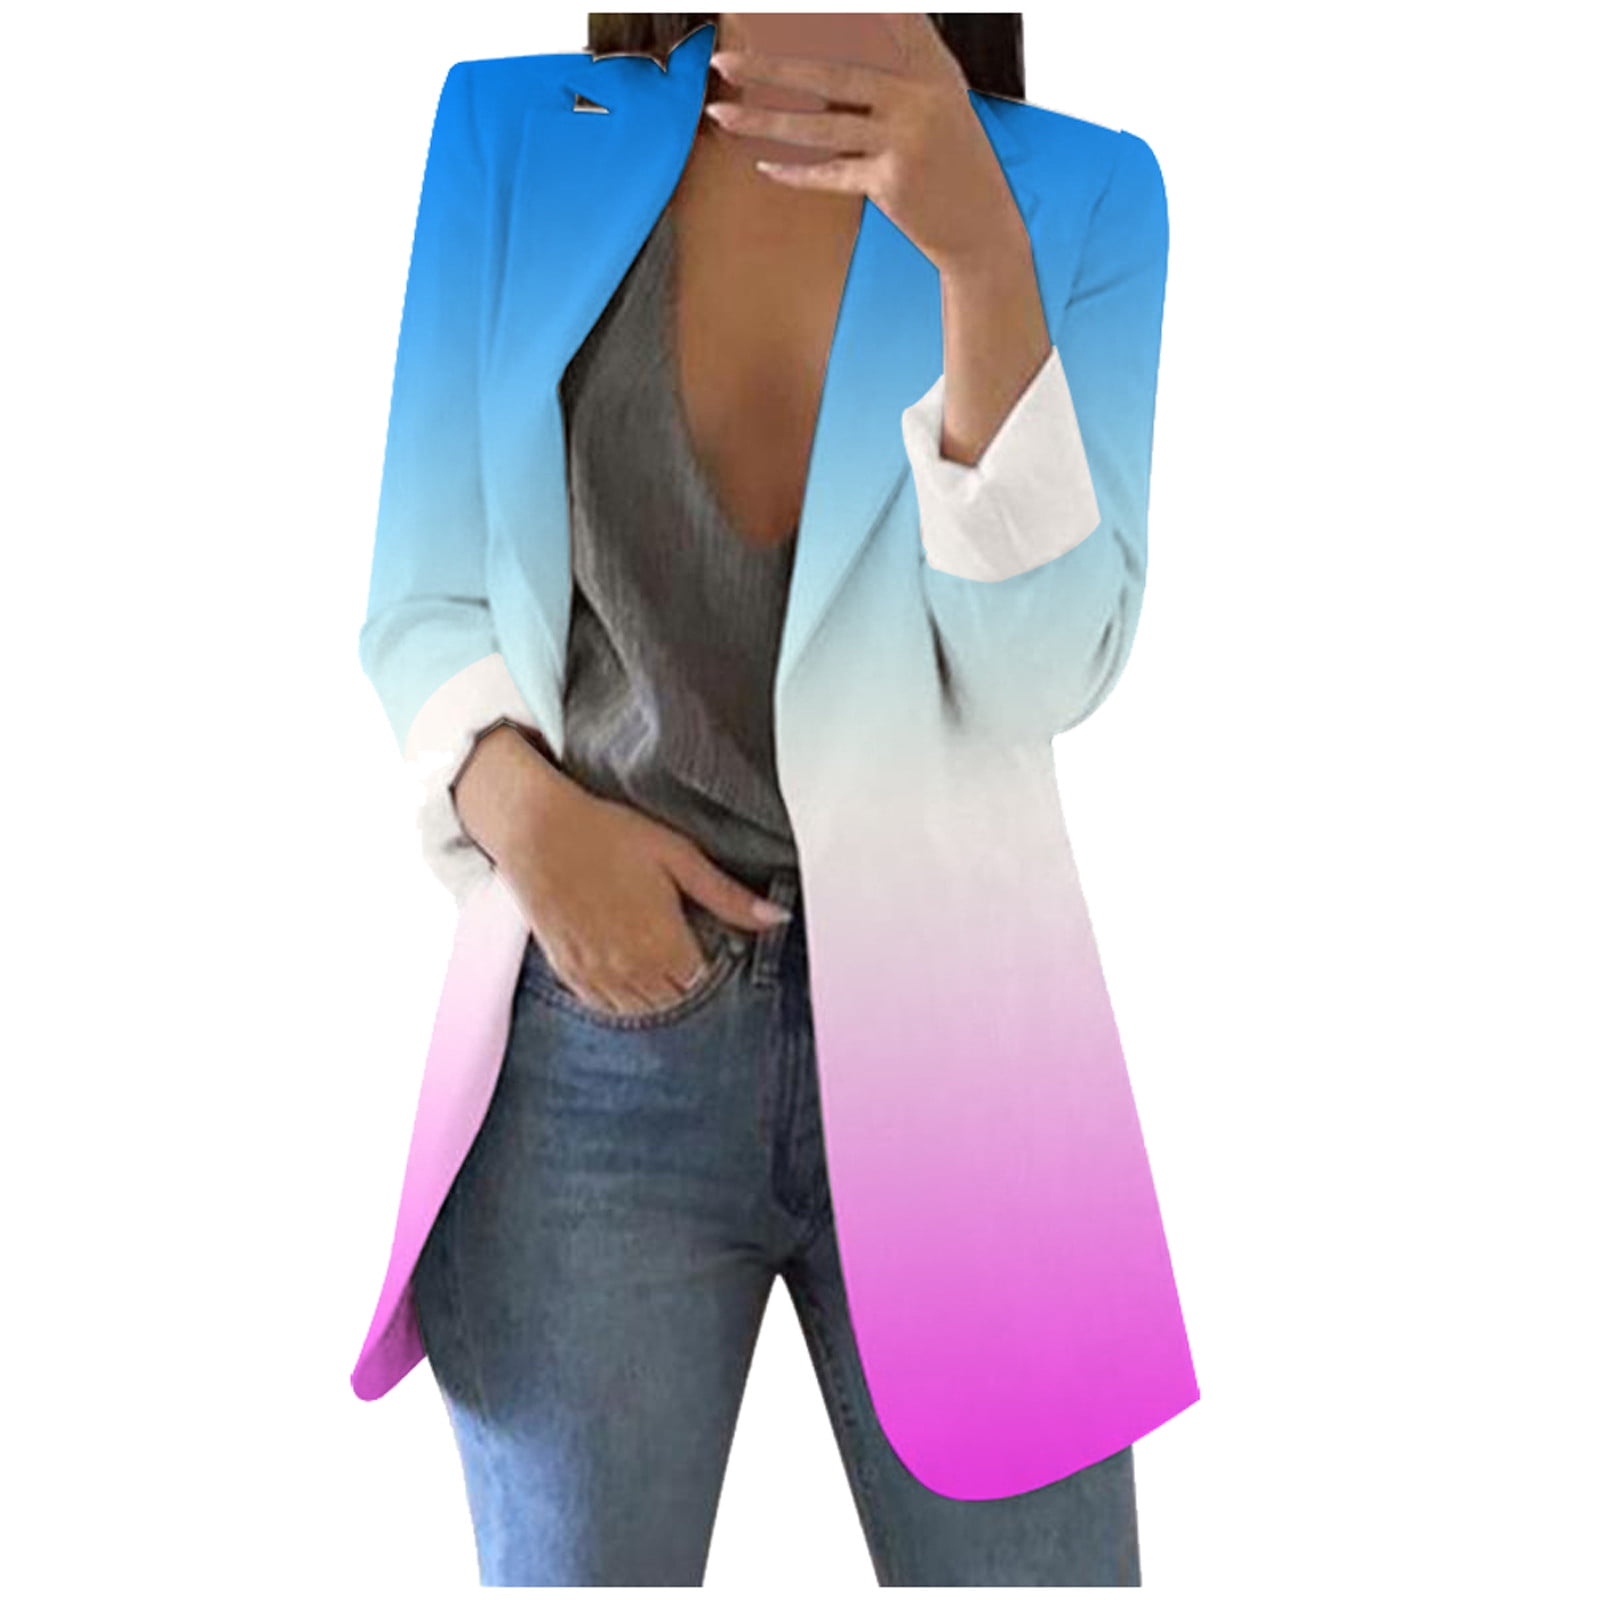 HSMQHJWE Womens Business Suits For Work Professional Womens Puffy